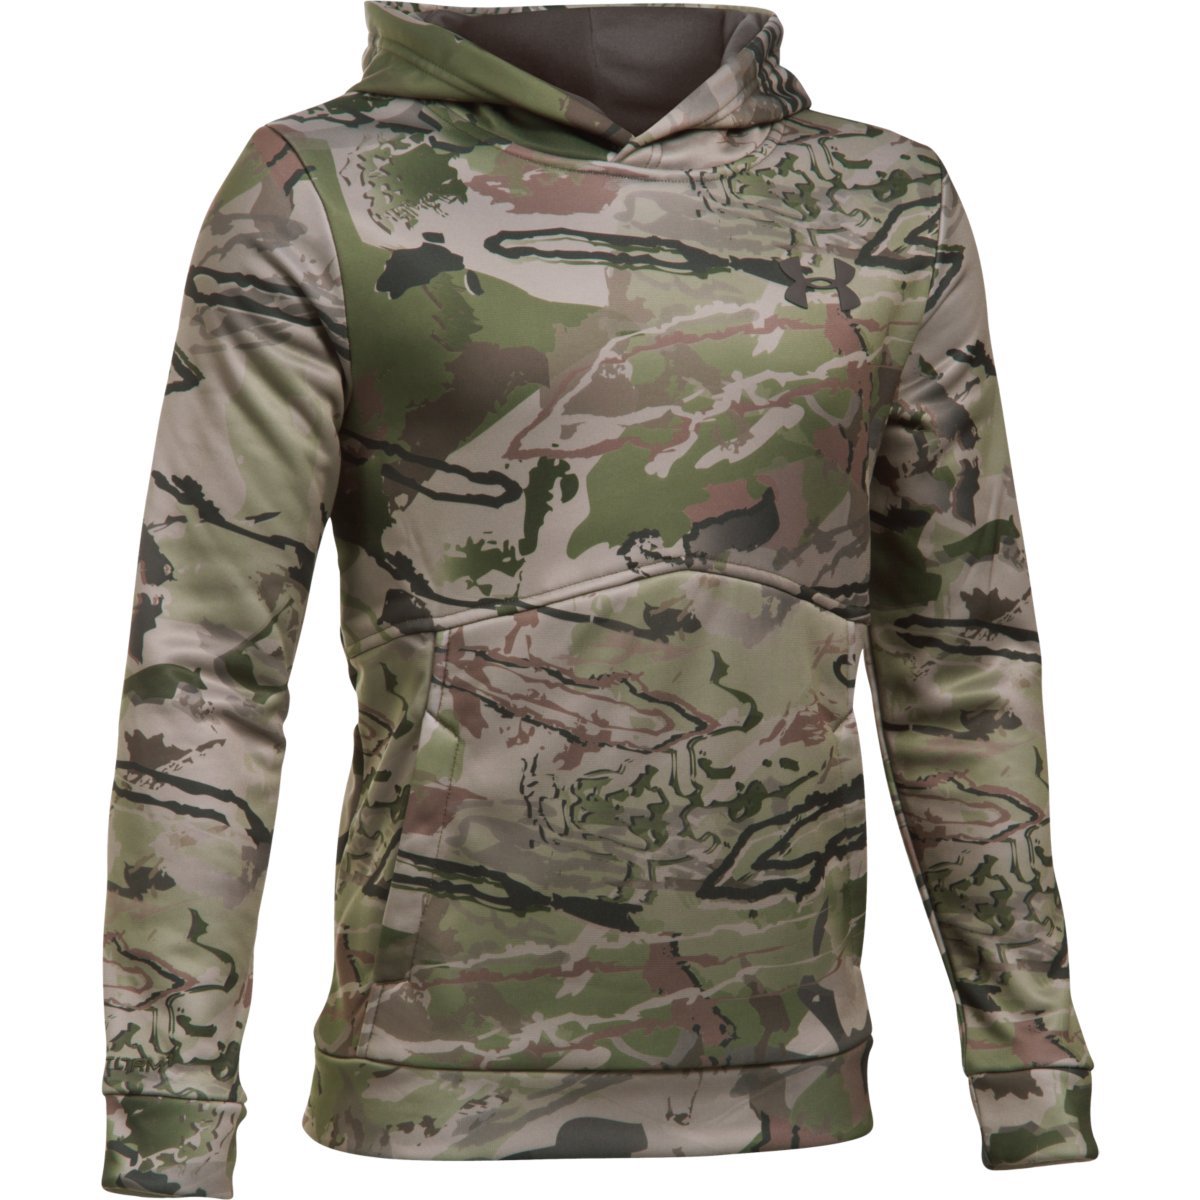 youth under armour hoodies cheap